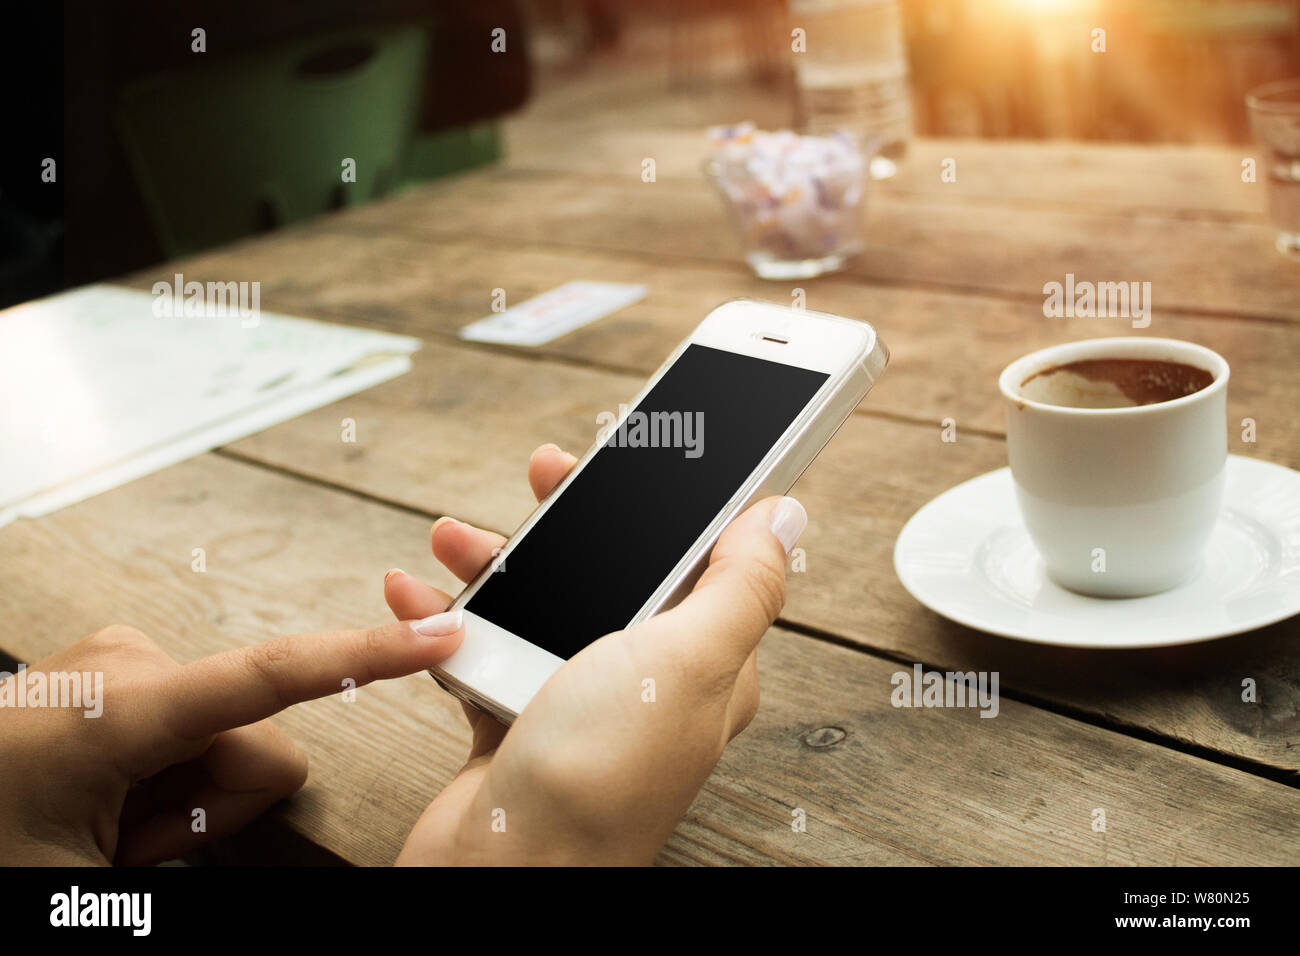 Smartphone in hands. Clipping path included. Stock Photo